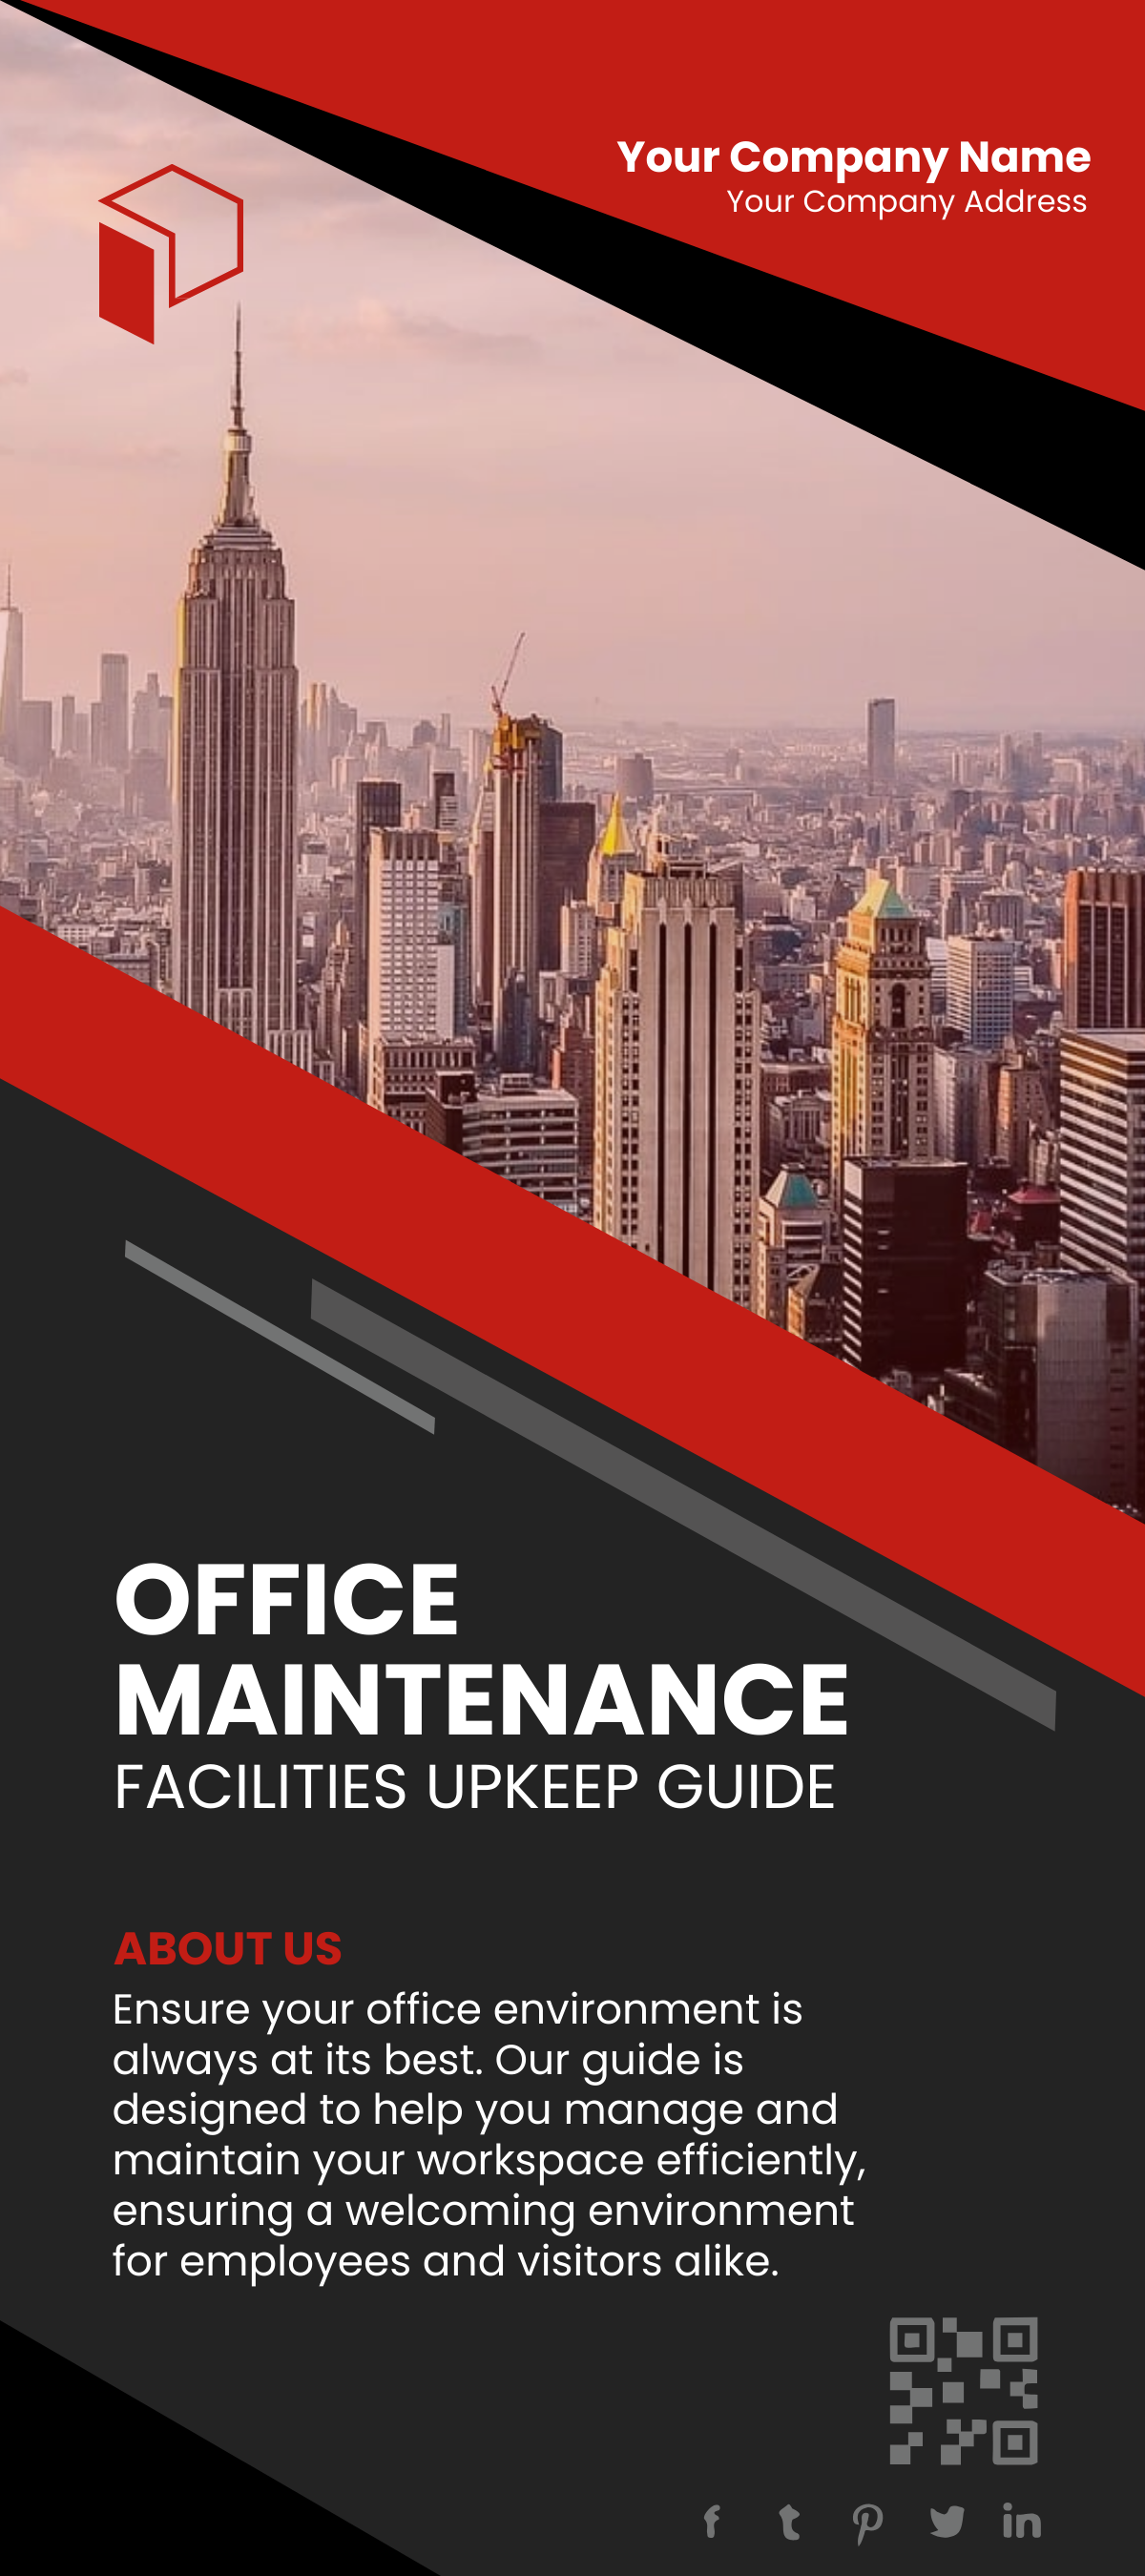 Office Maintenance and Facilities Upkeep Guide Rack Card